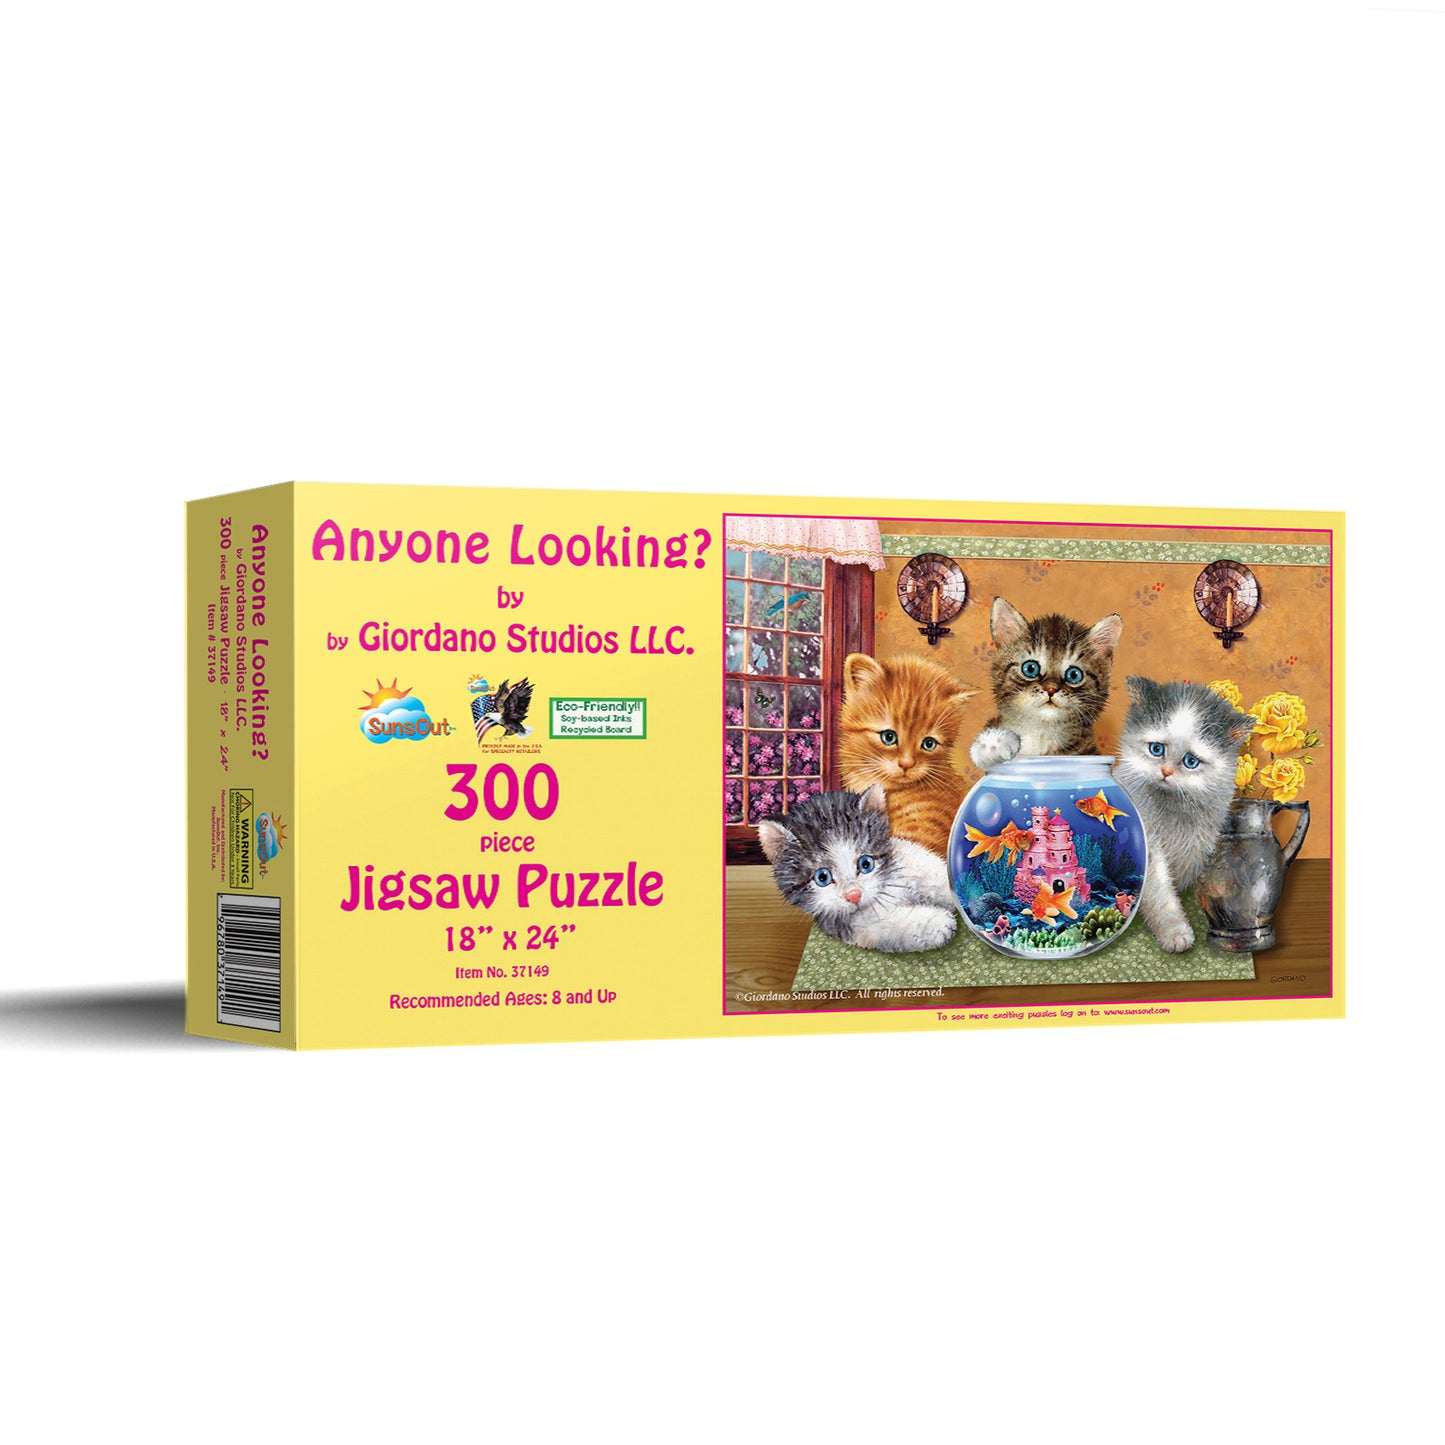 Anyone Looking? - 300 Piece Jigsaw Puzzle